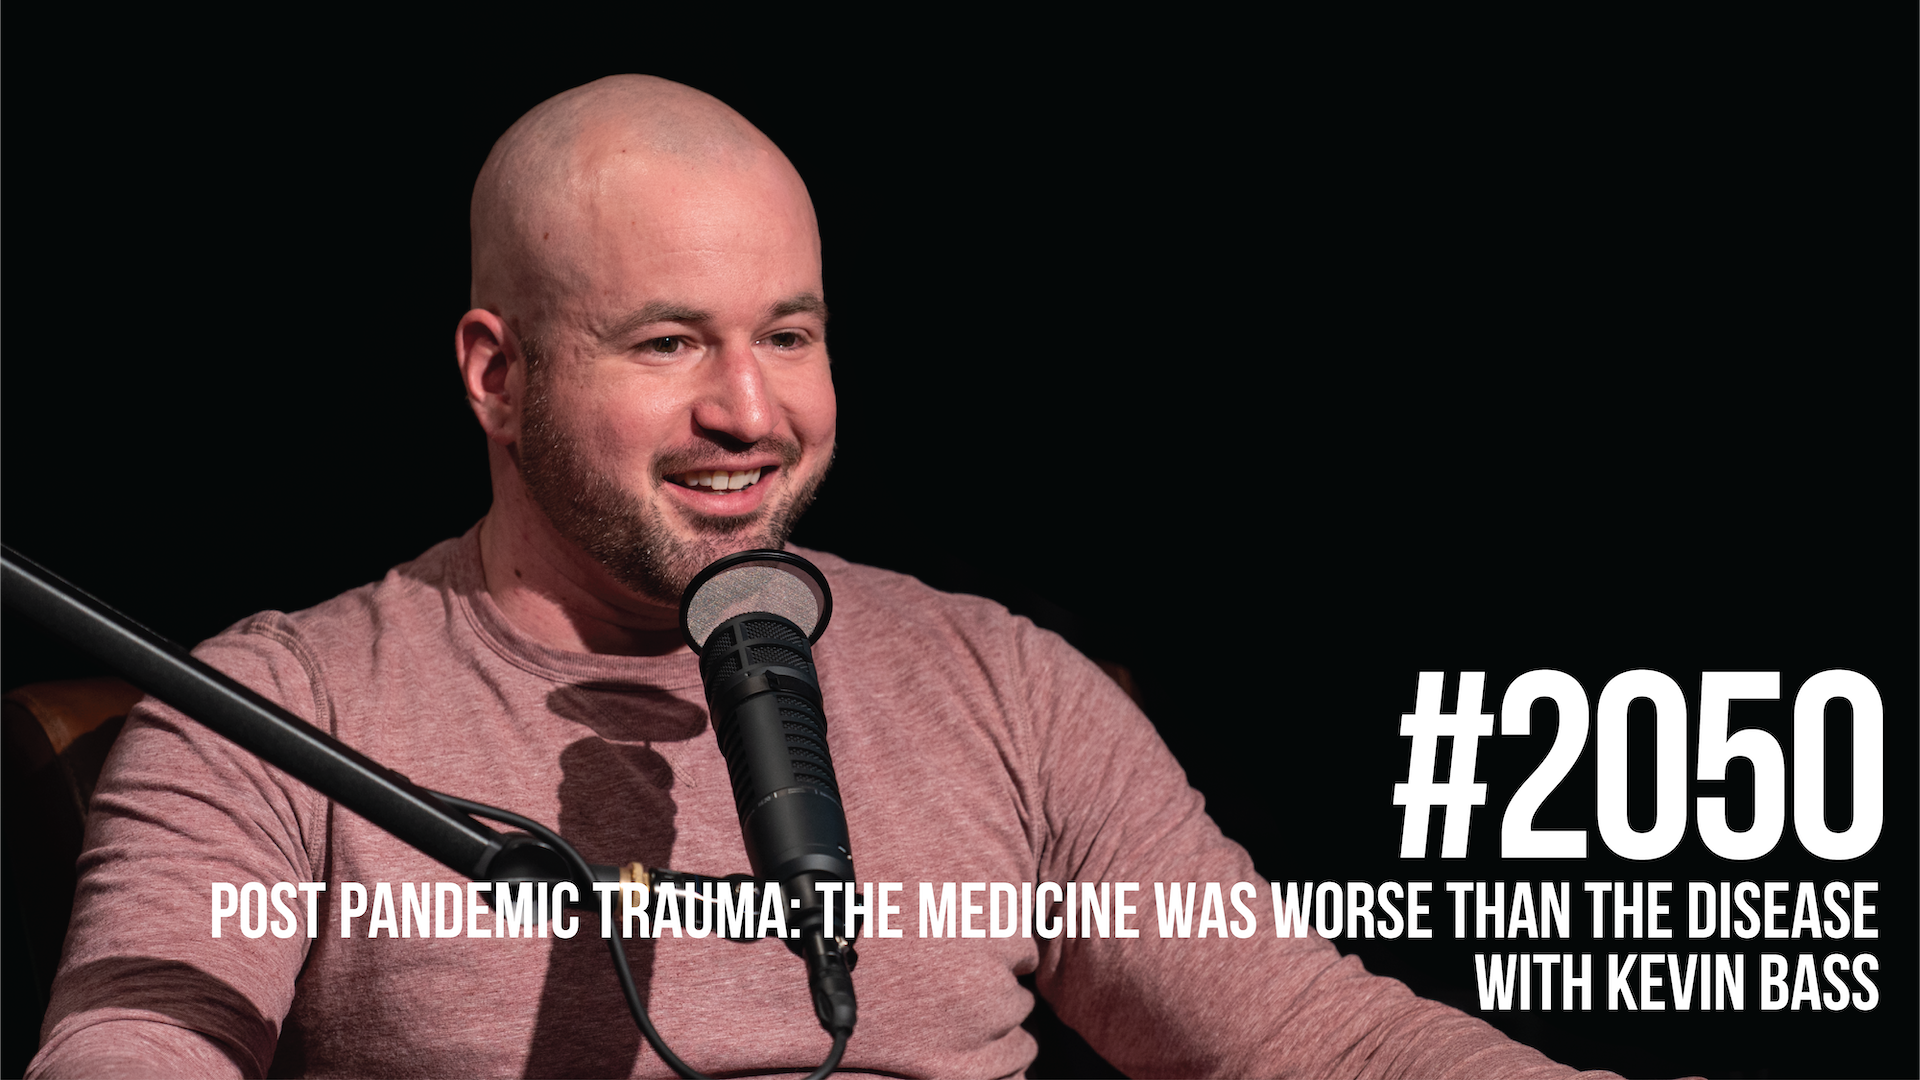 2050: Post Pandemic Trauma: The Medicine Was Worse Than the Disease With Kevin Bass